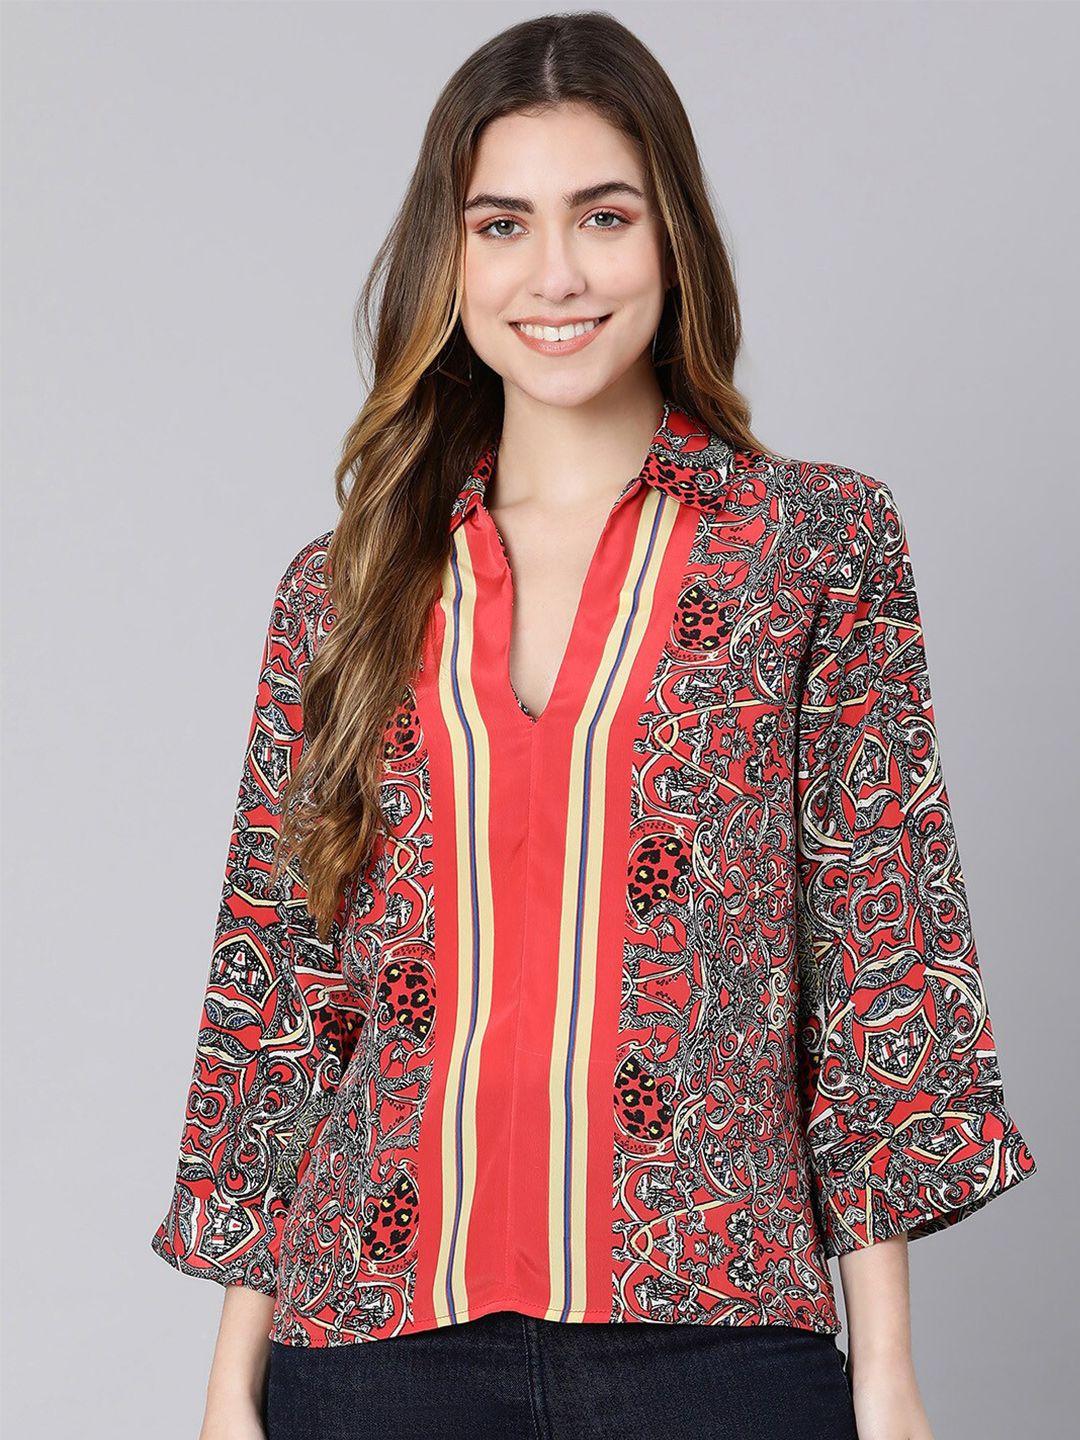 oxolloxo red & black printed shirt style satin top